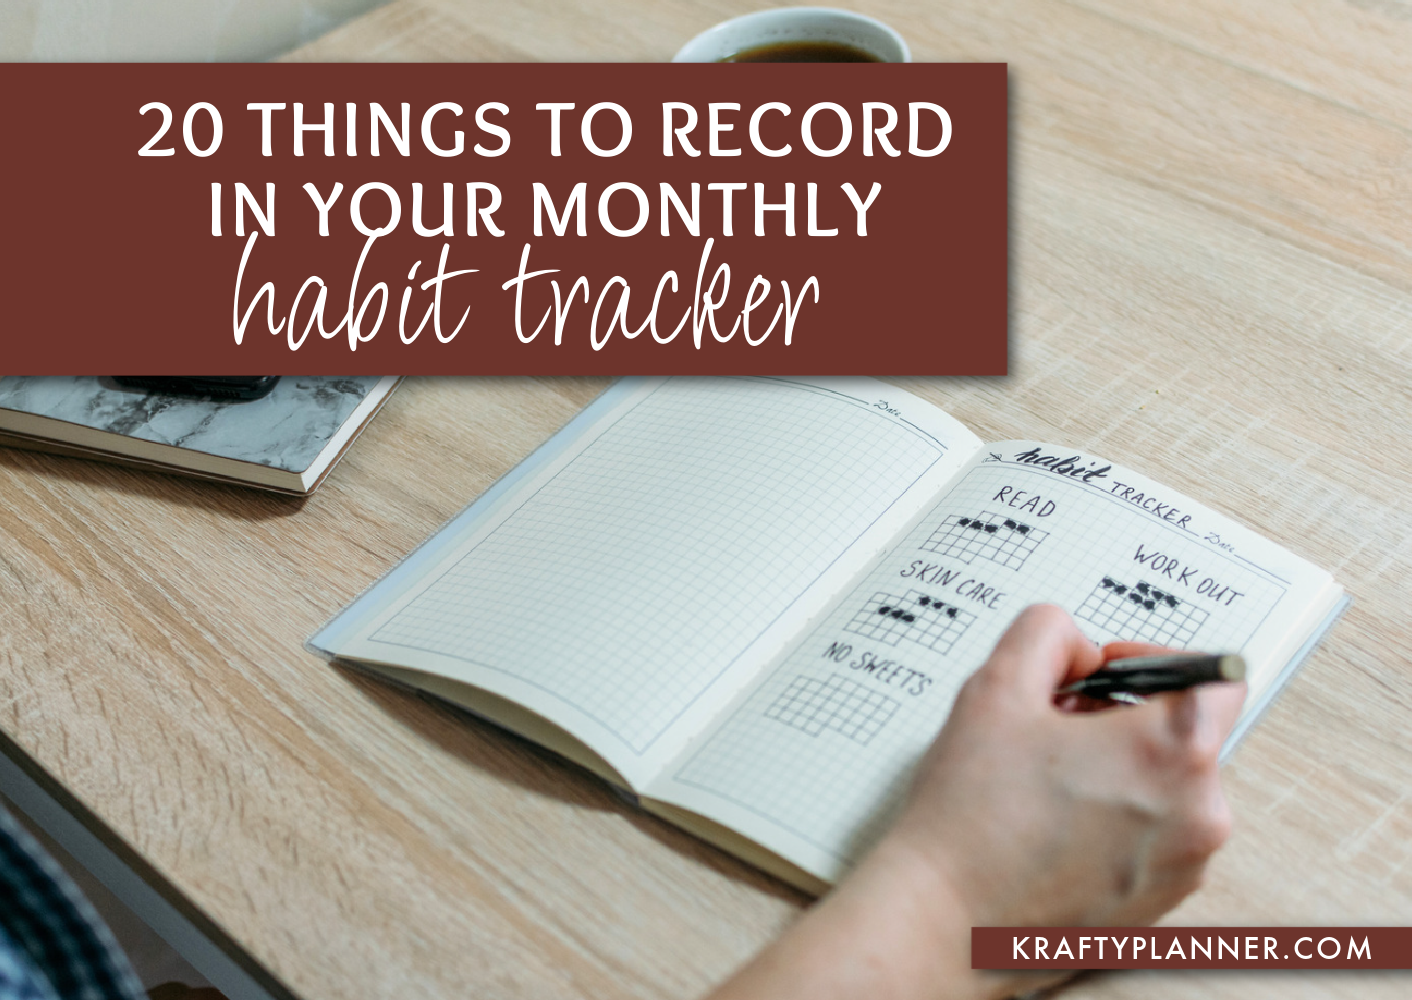 20 Things to Record in Your Monthly Tracker